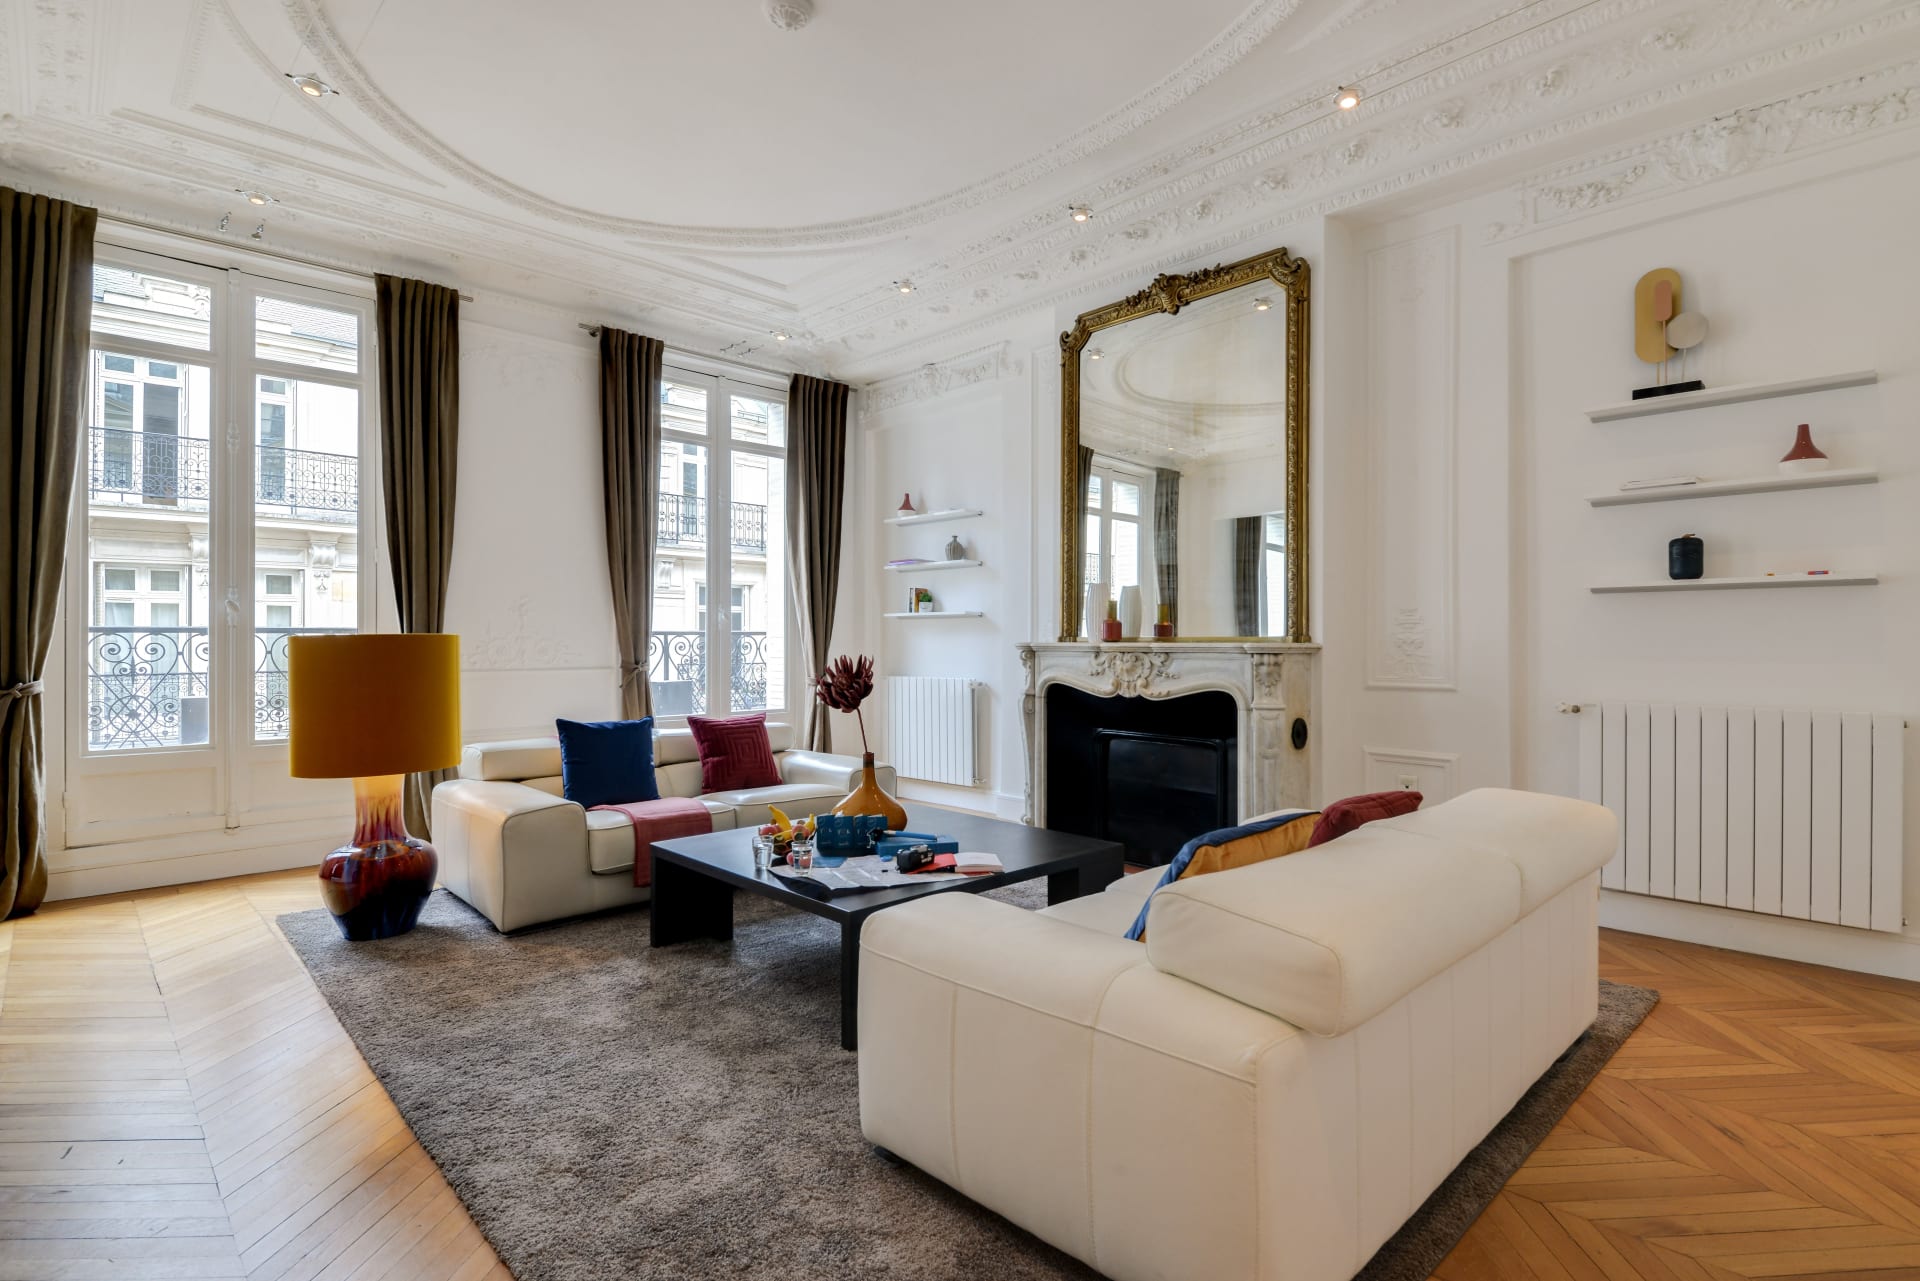 Property Image 1 - One bedroom stylish apartment in the heart of Champs-�lys�es, Paris.